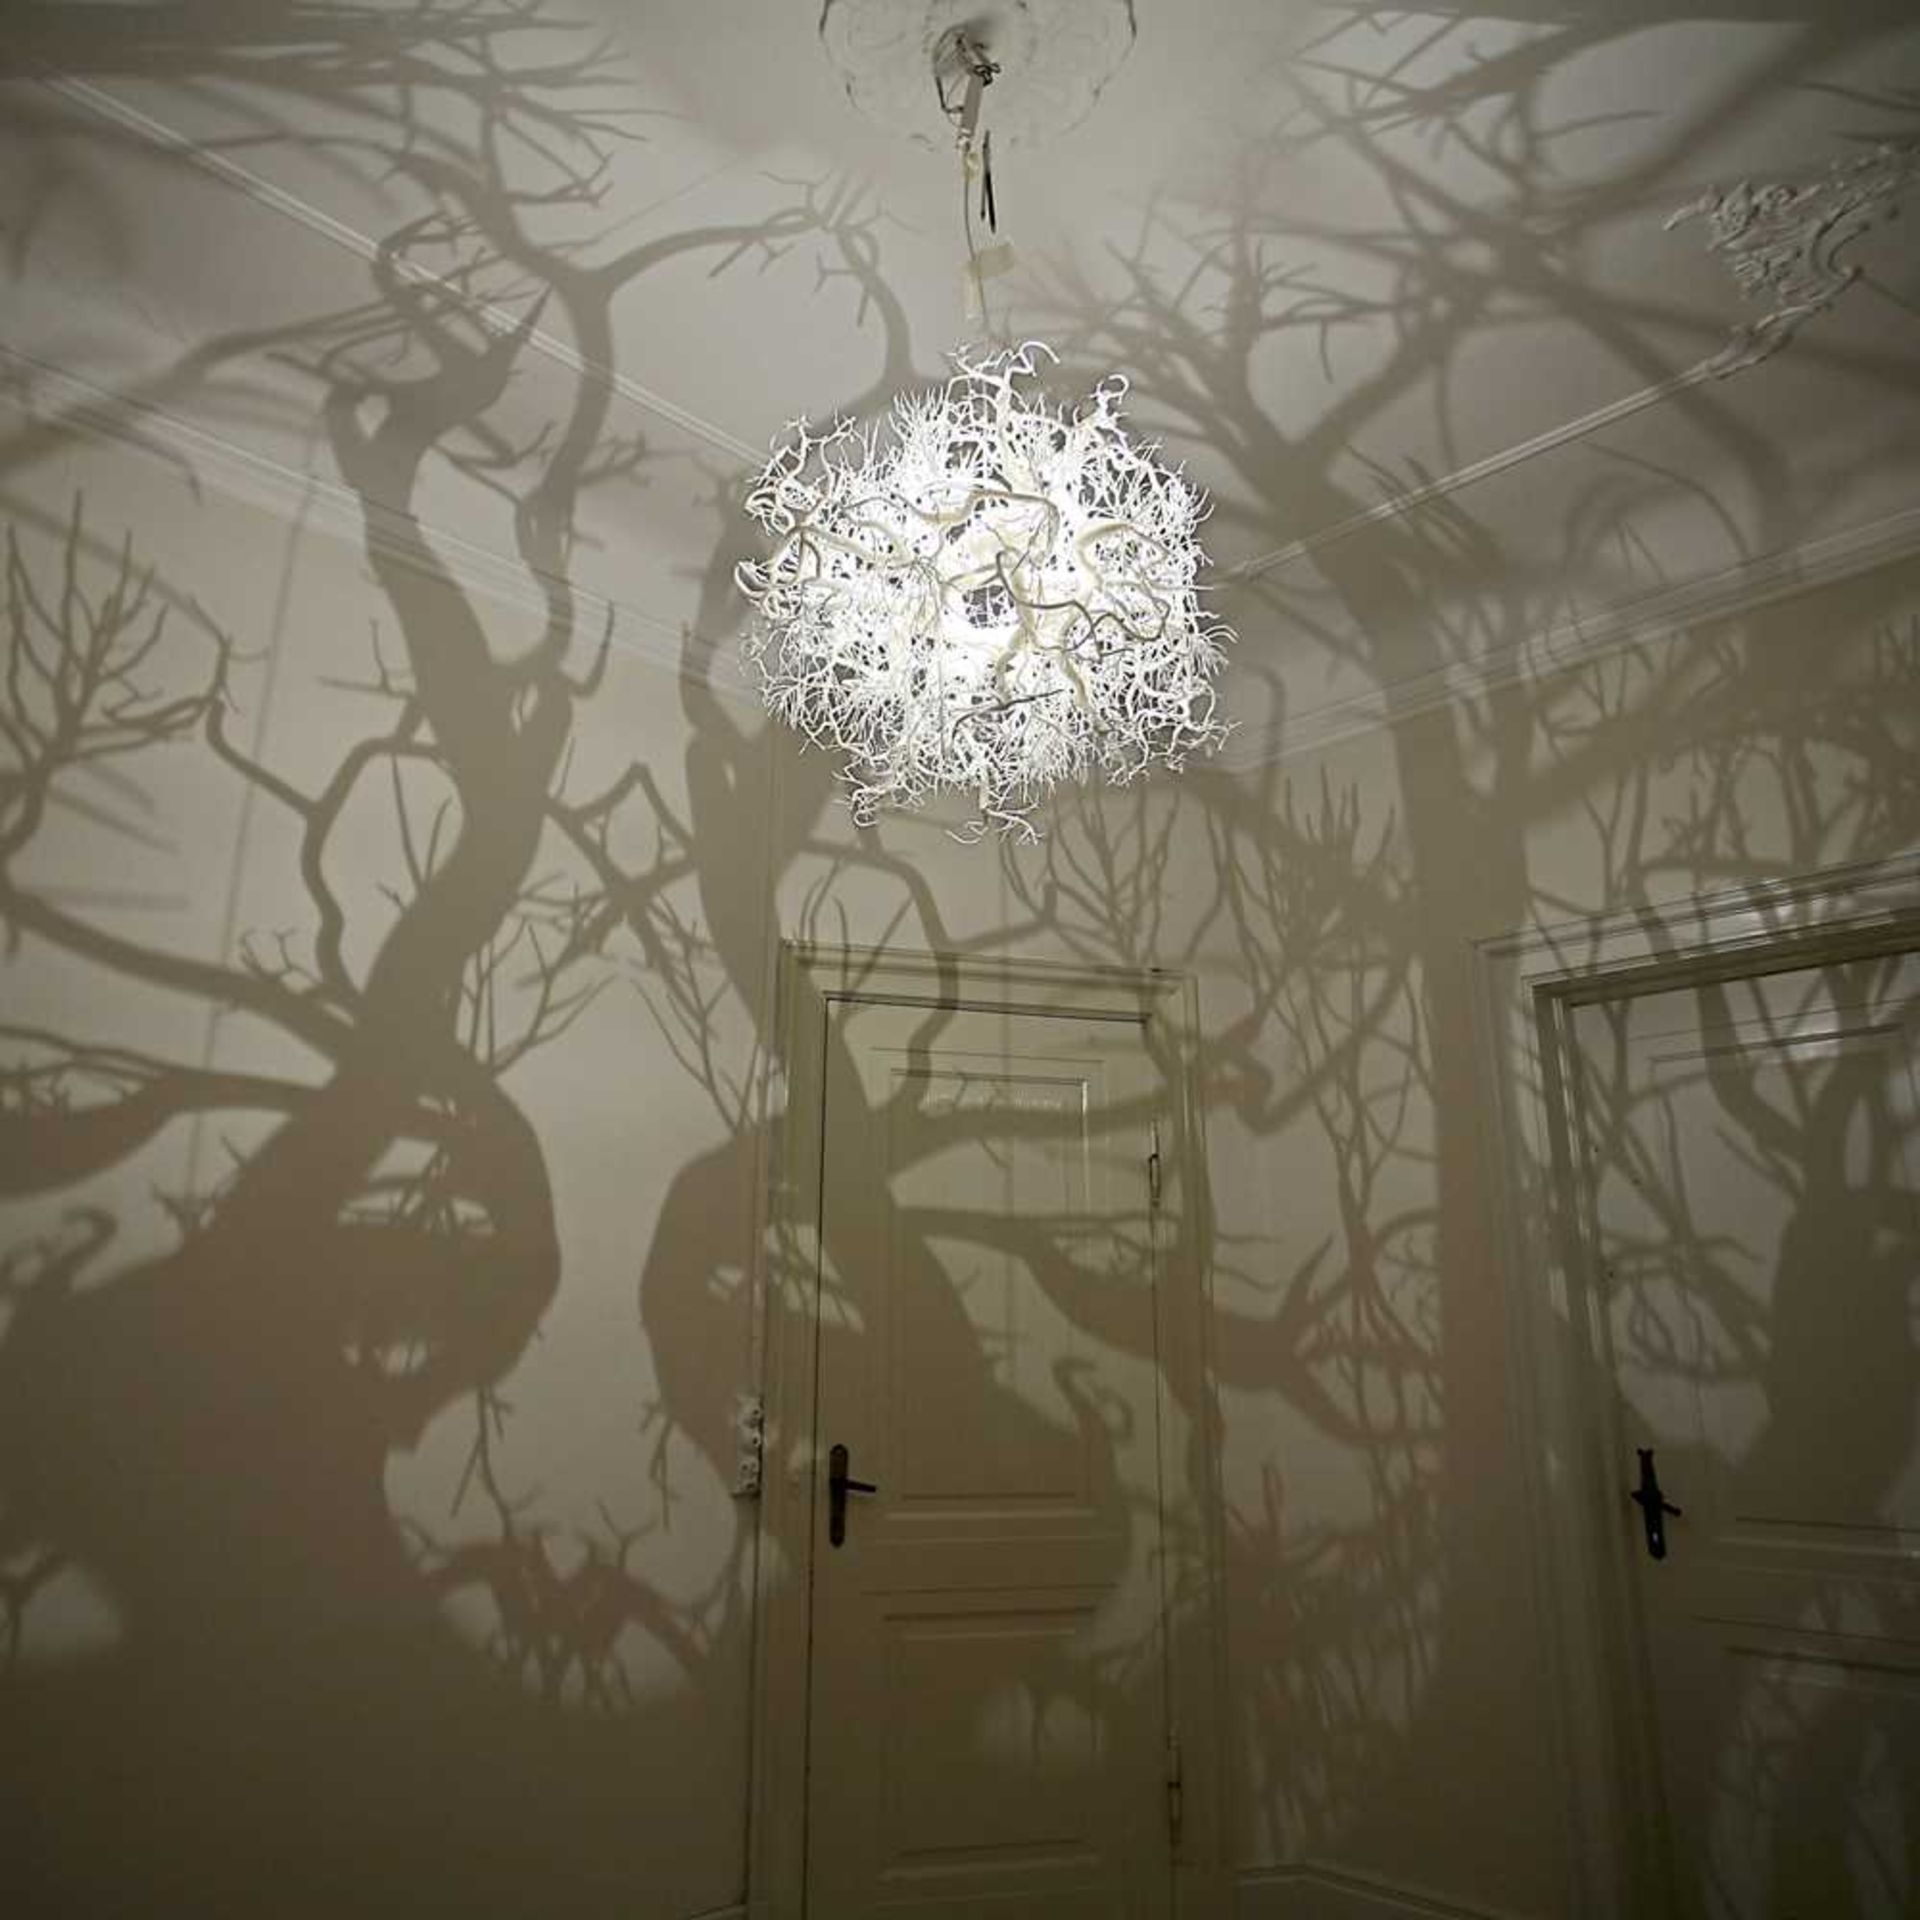 Thyra Hilden (Danish, B. 1972) and Pio Diaz (Argentinian, B. 1973) 'Forms of Nature' Chandelier